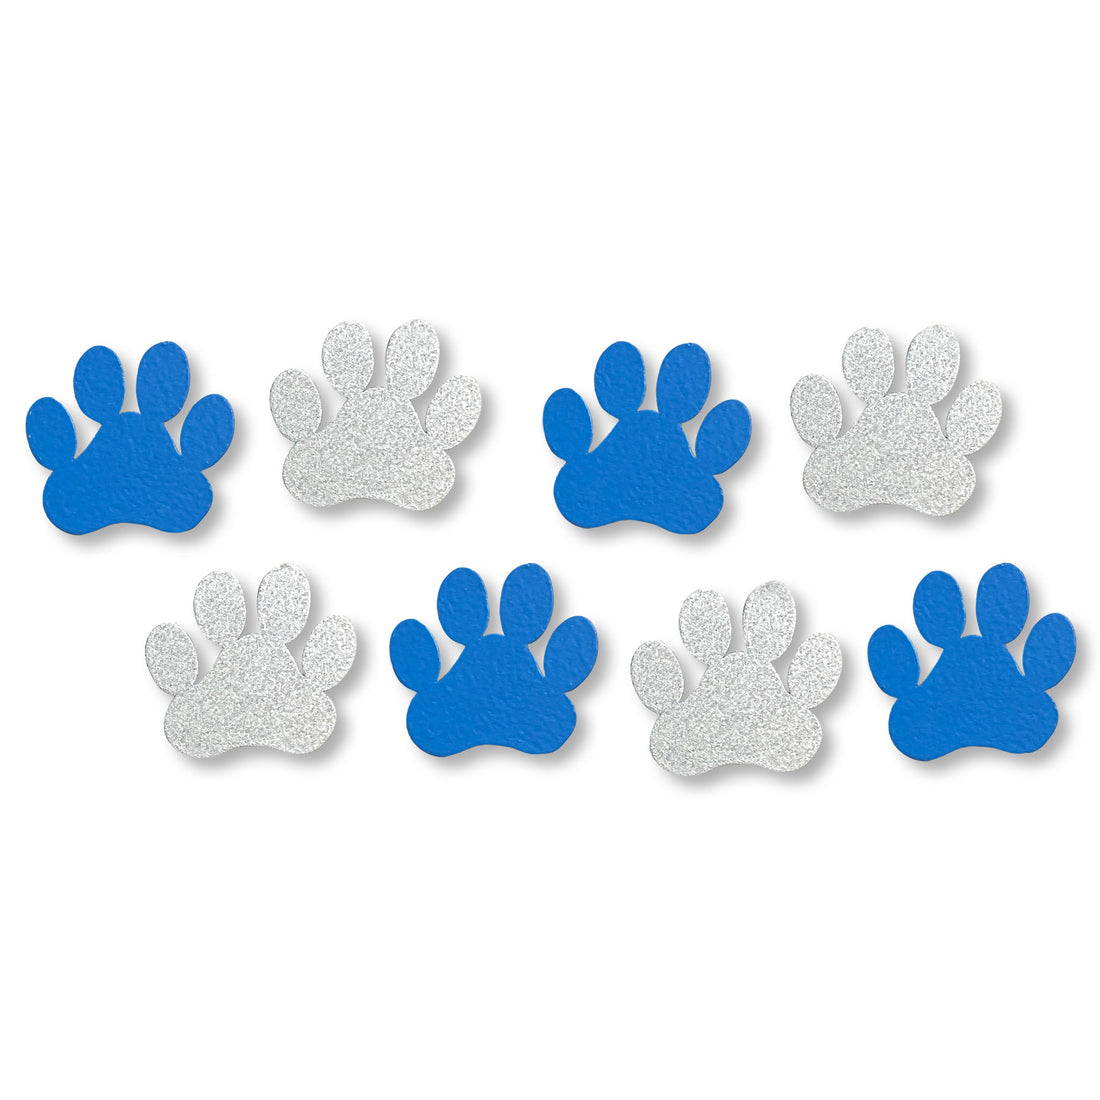 Paw Print Magnets S/8 Blue/Silver